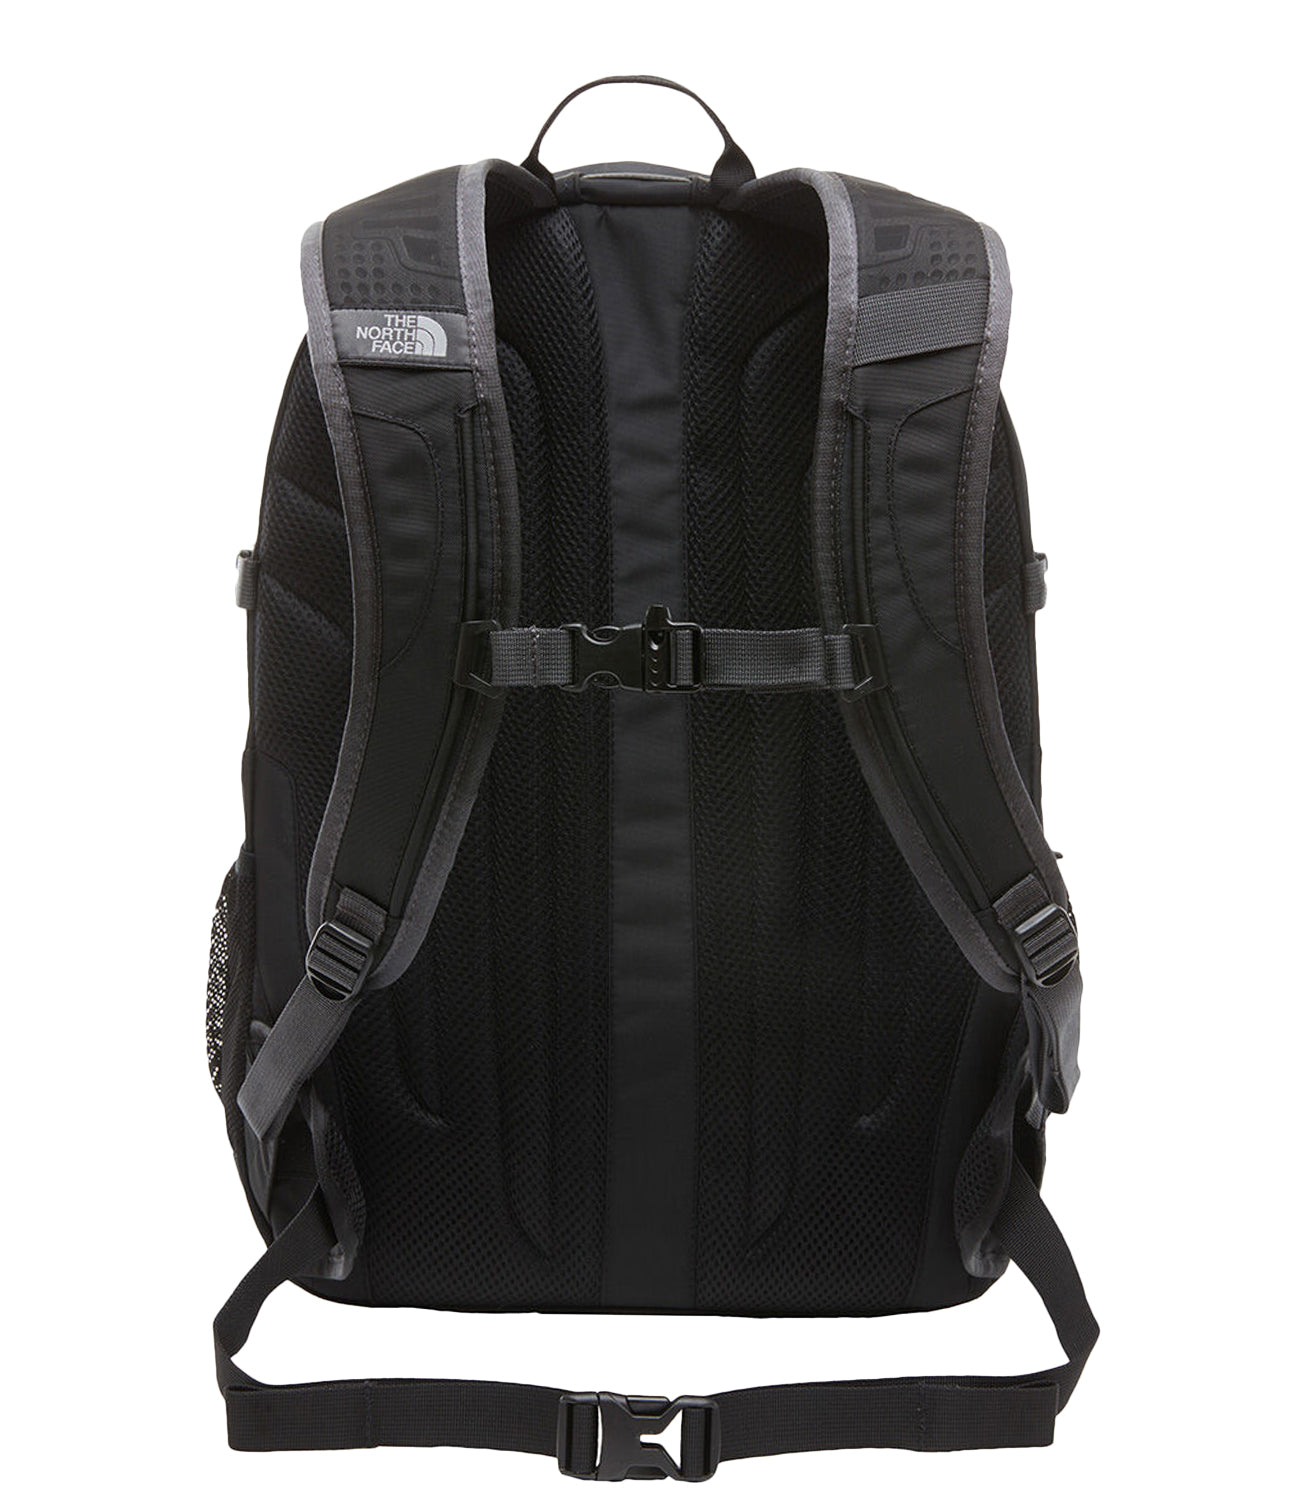 The North Face | Black Backpack